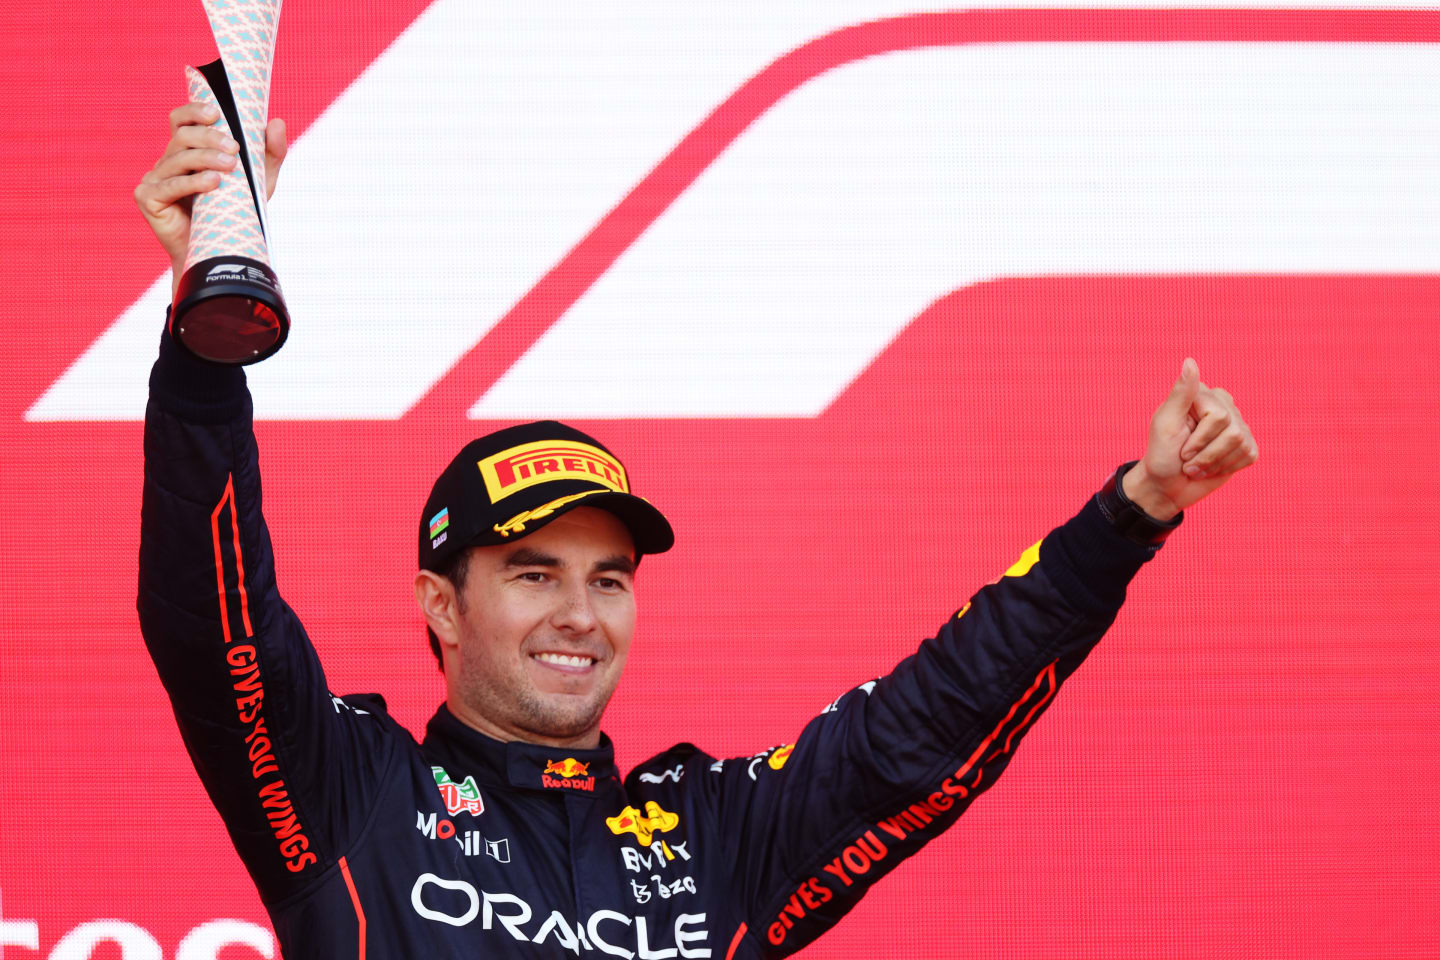 BAKU, AZERBAIJAN - JUNE 12: Second placed Sergio Perez of Mexico and Oracle Red Bull Racing celebrates on the podium during the F1 Grand Prix of Azerbaijan at Baku City Circuit on June 12, 2022 in Baku, Azerbaijan. (Photo by Peter Fox/Getty Images)